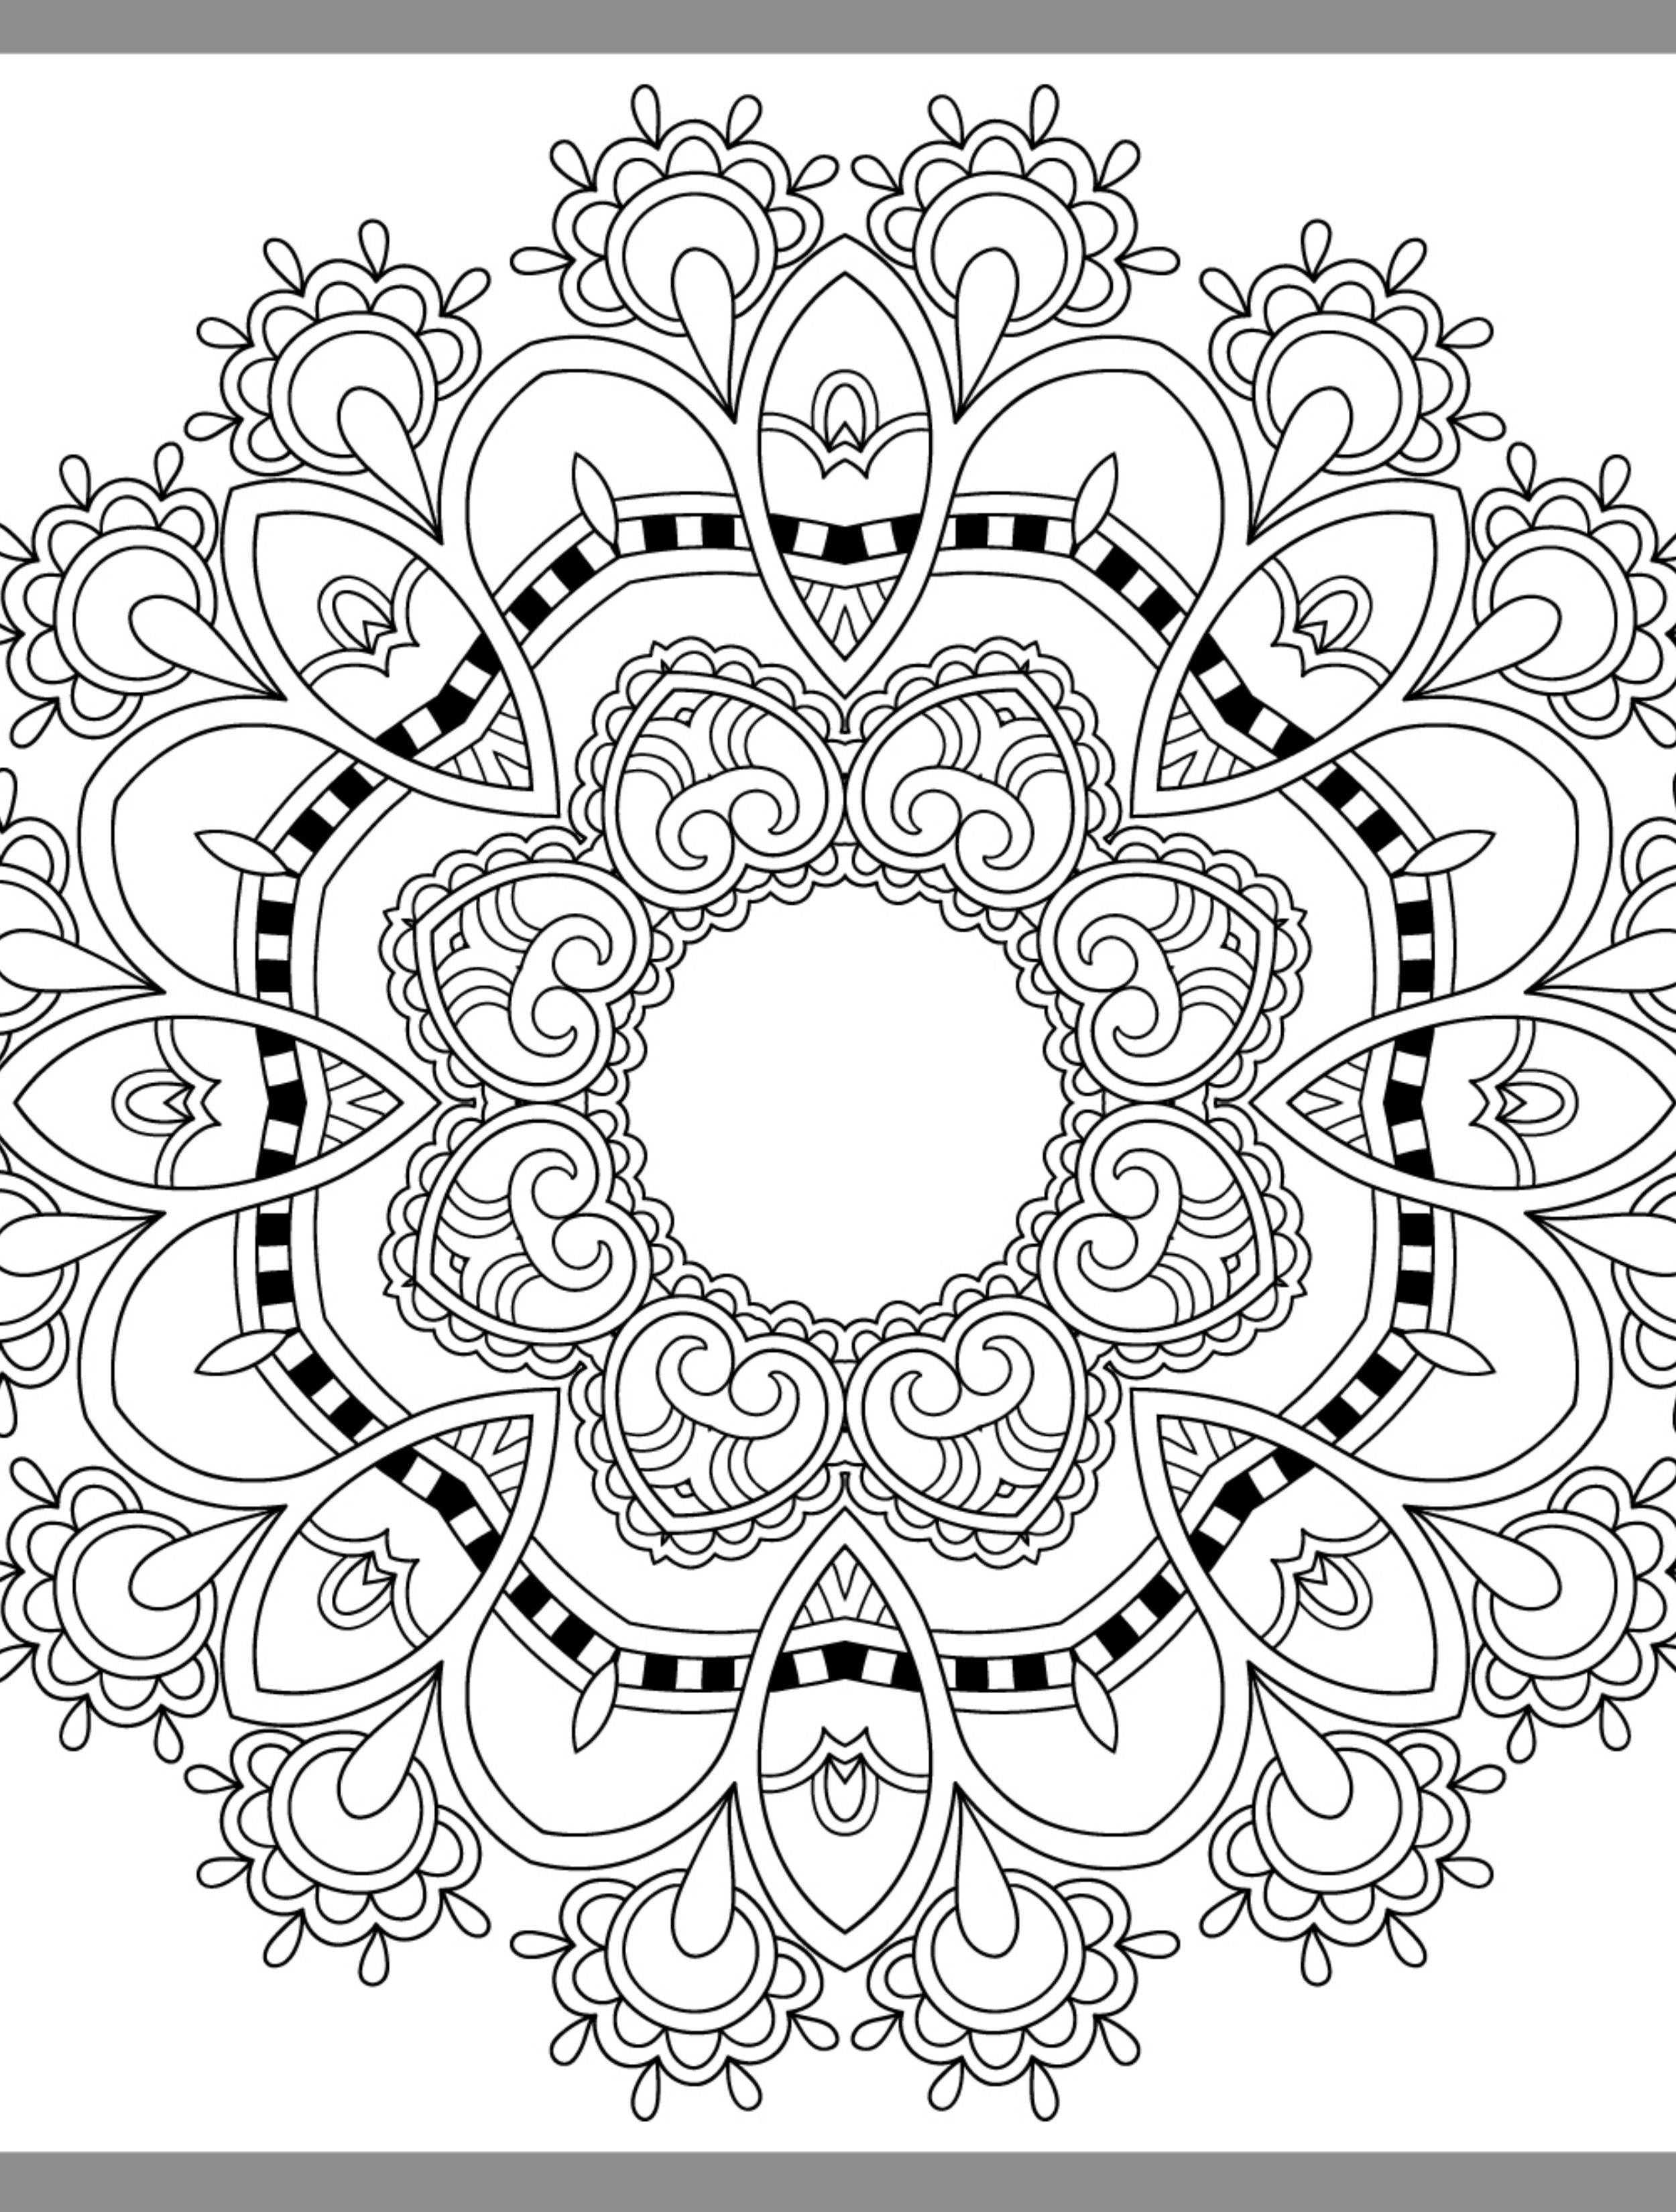 24 More Free Printable Adult Coloring Pages - Page 13 of 25 ...